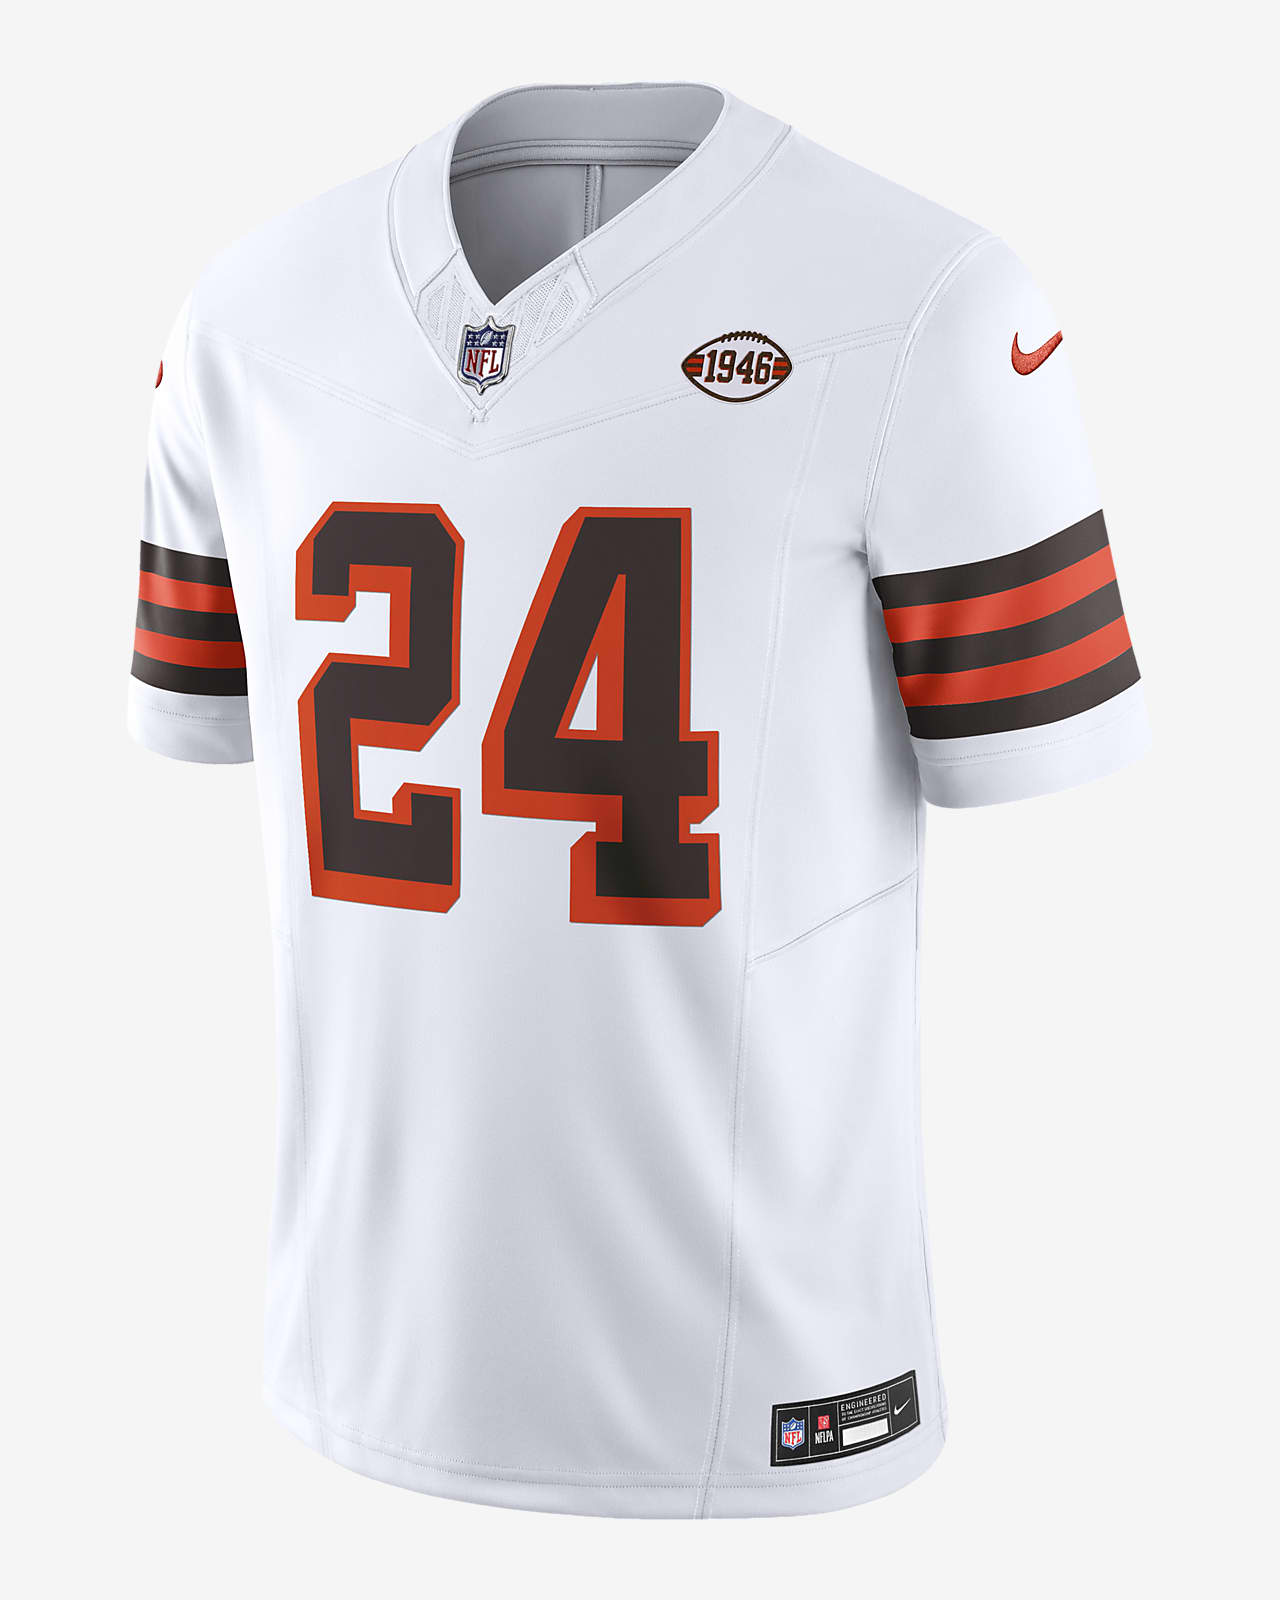 Nick Chubb Cleveland Browns Men's Nike Dri-FIT NFL Limited Football Jersey